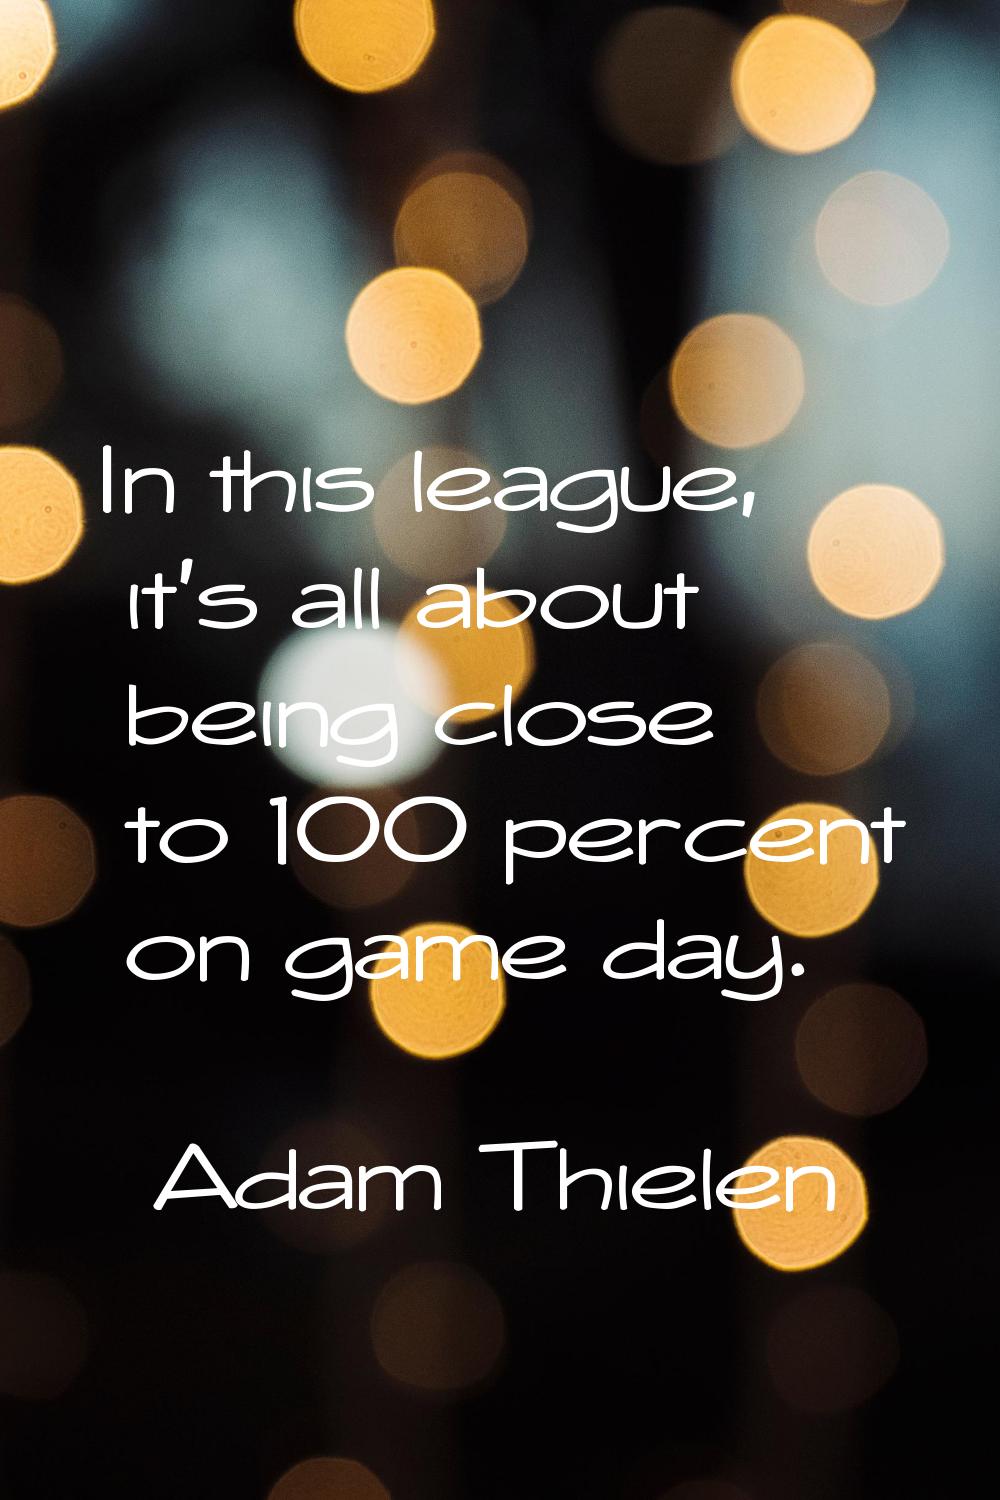 In this league, it's all about being close to 100 percent on game day.